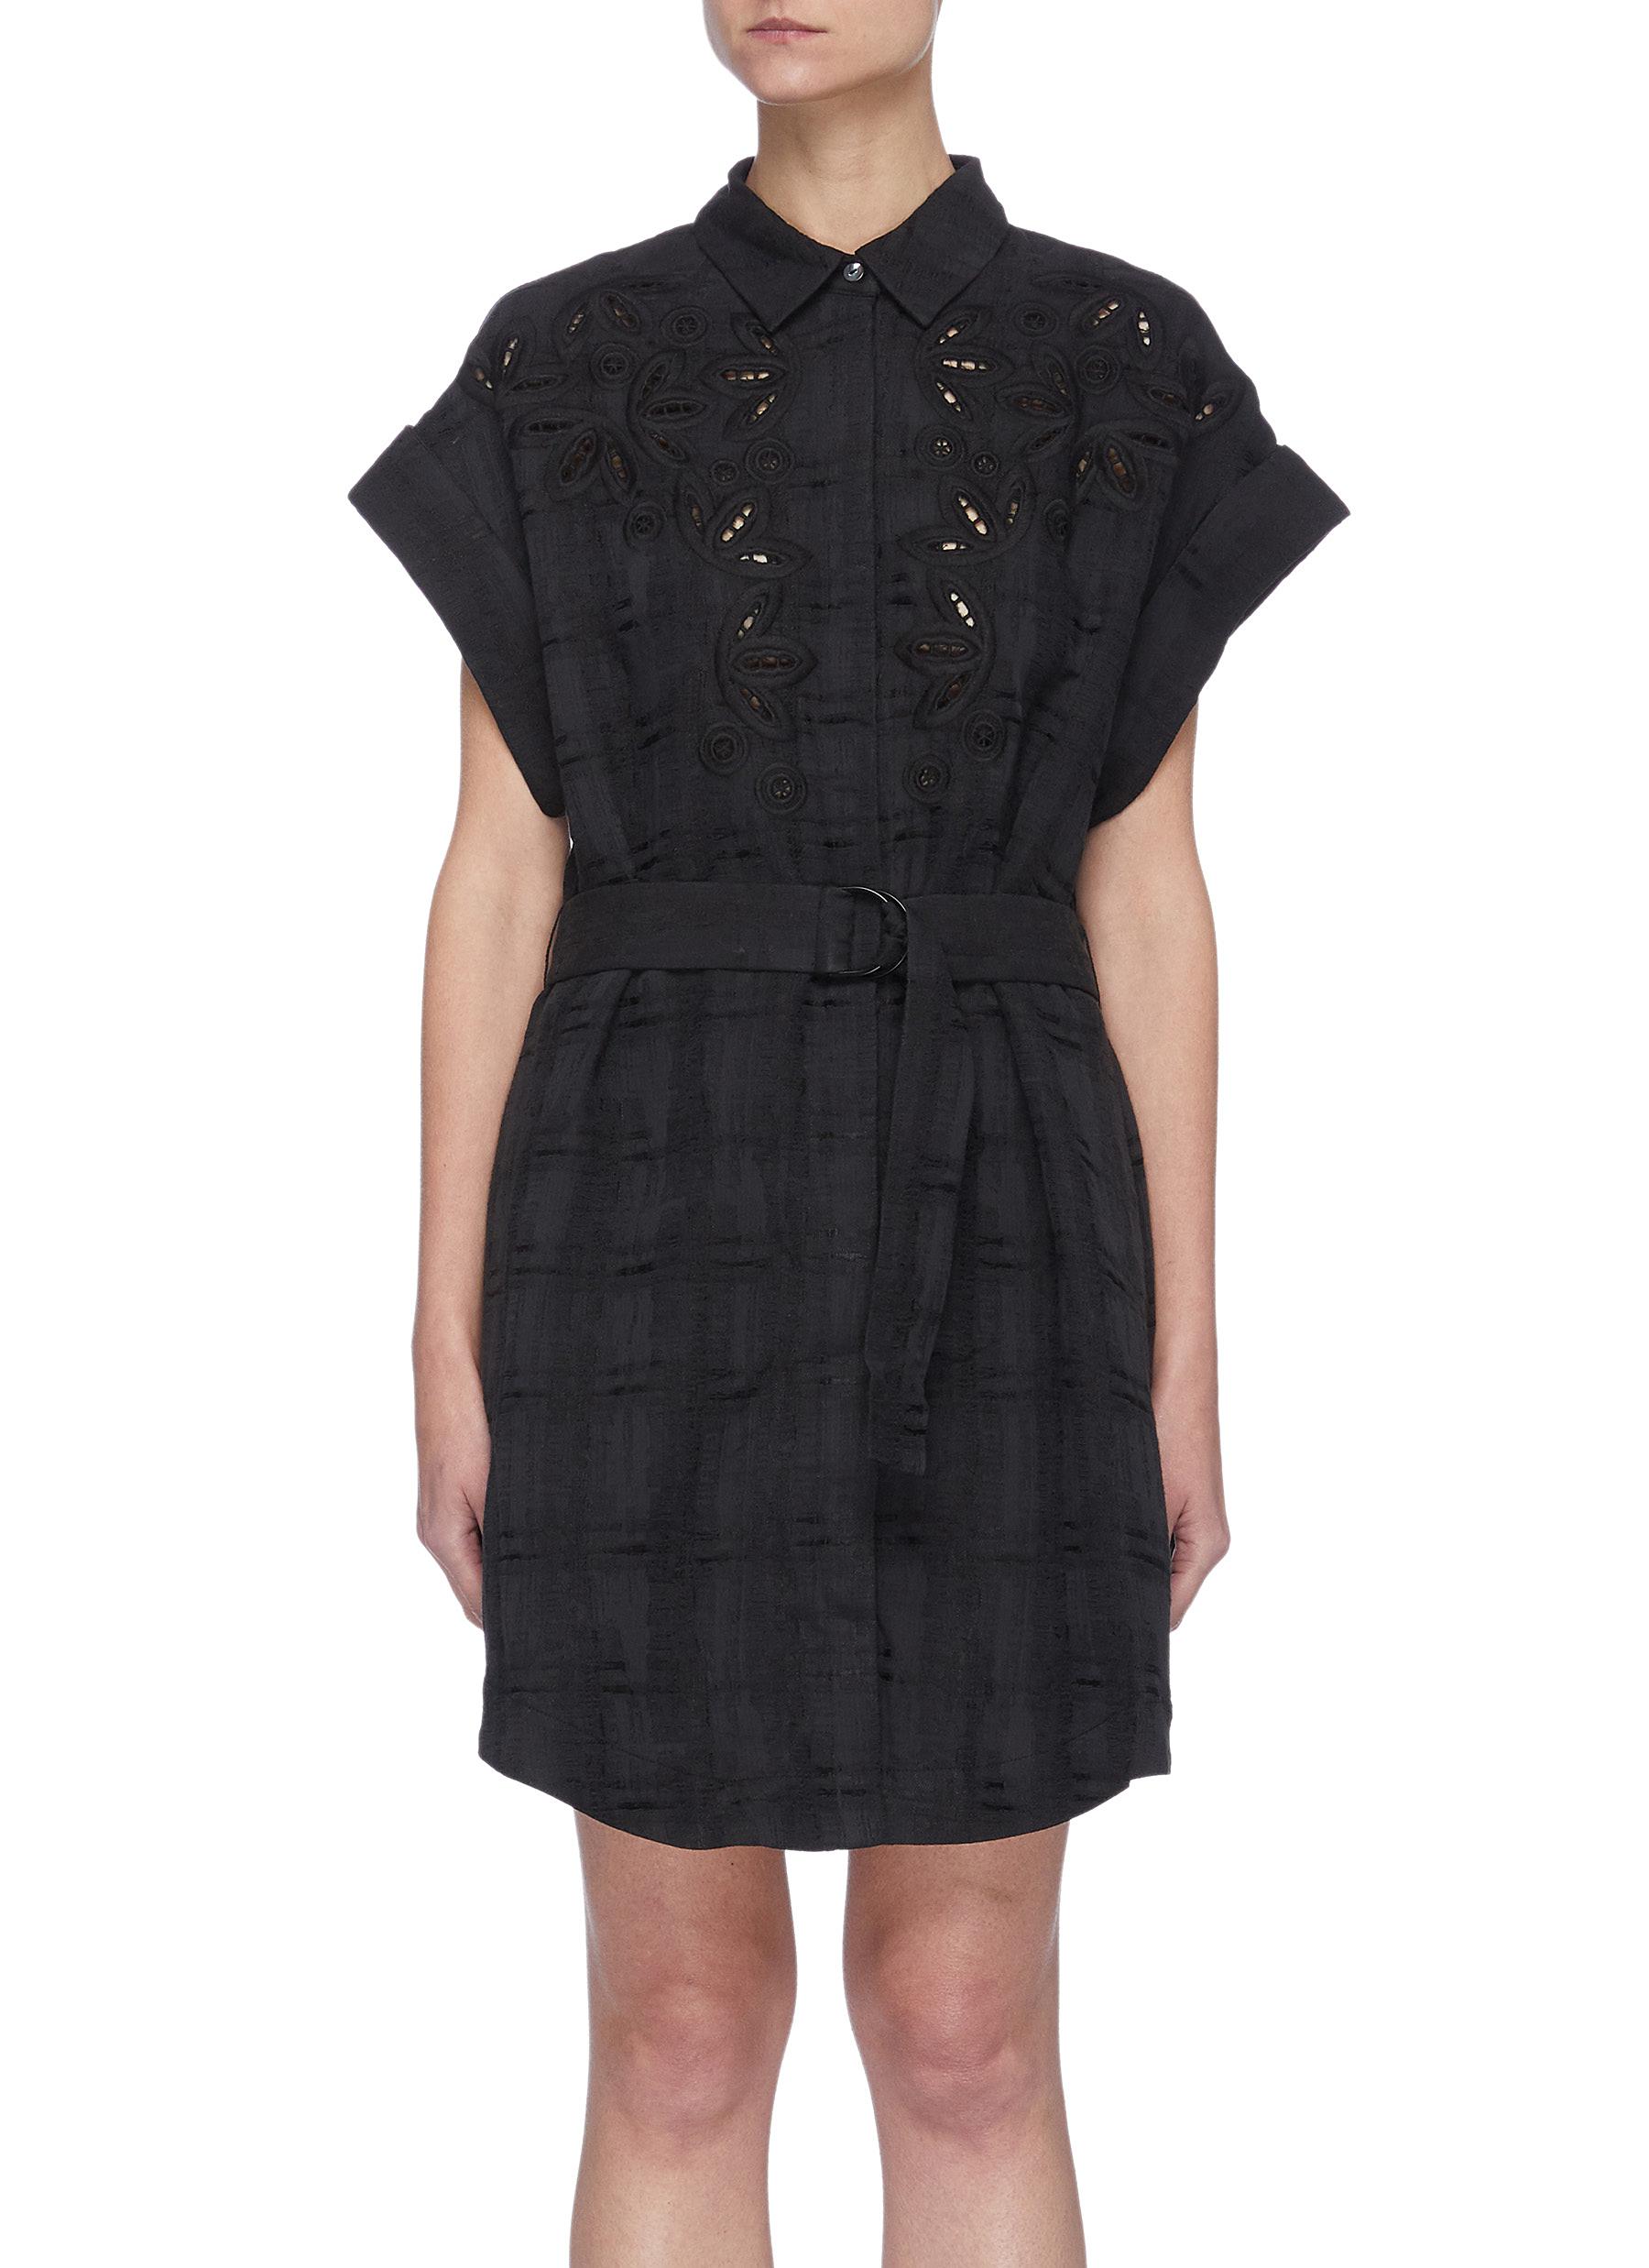 ACLER 'SIERRA' BELTED FLORAL LACE DETAIL SHIRT DRESS